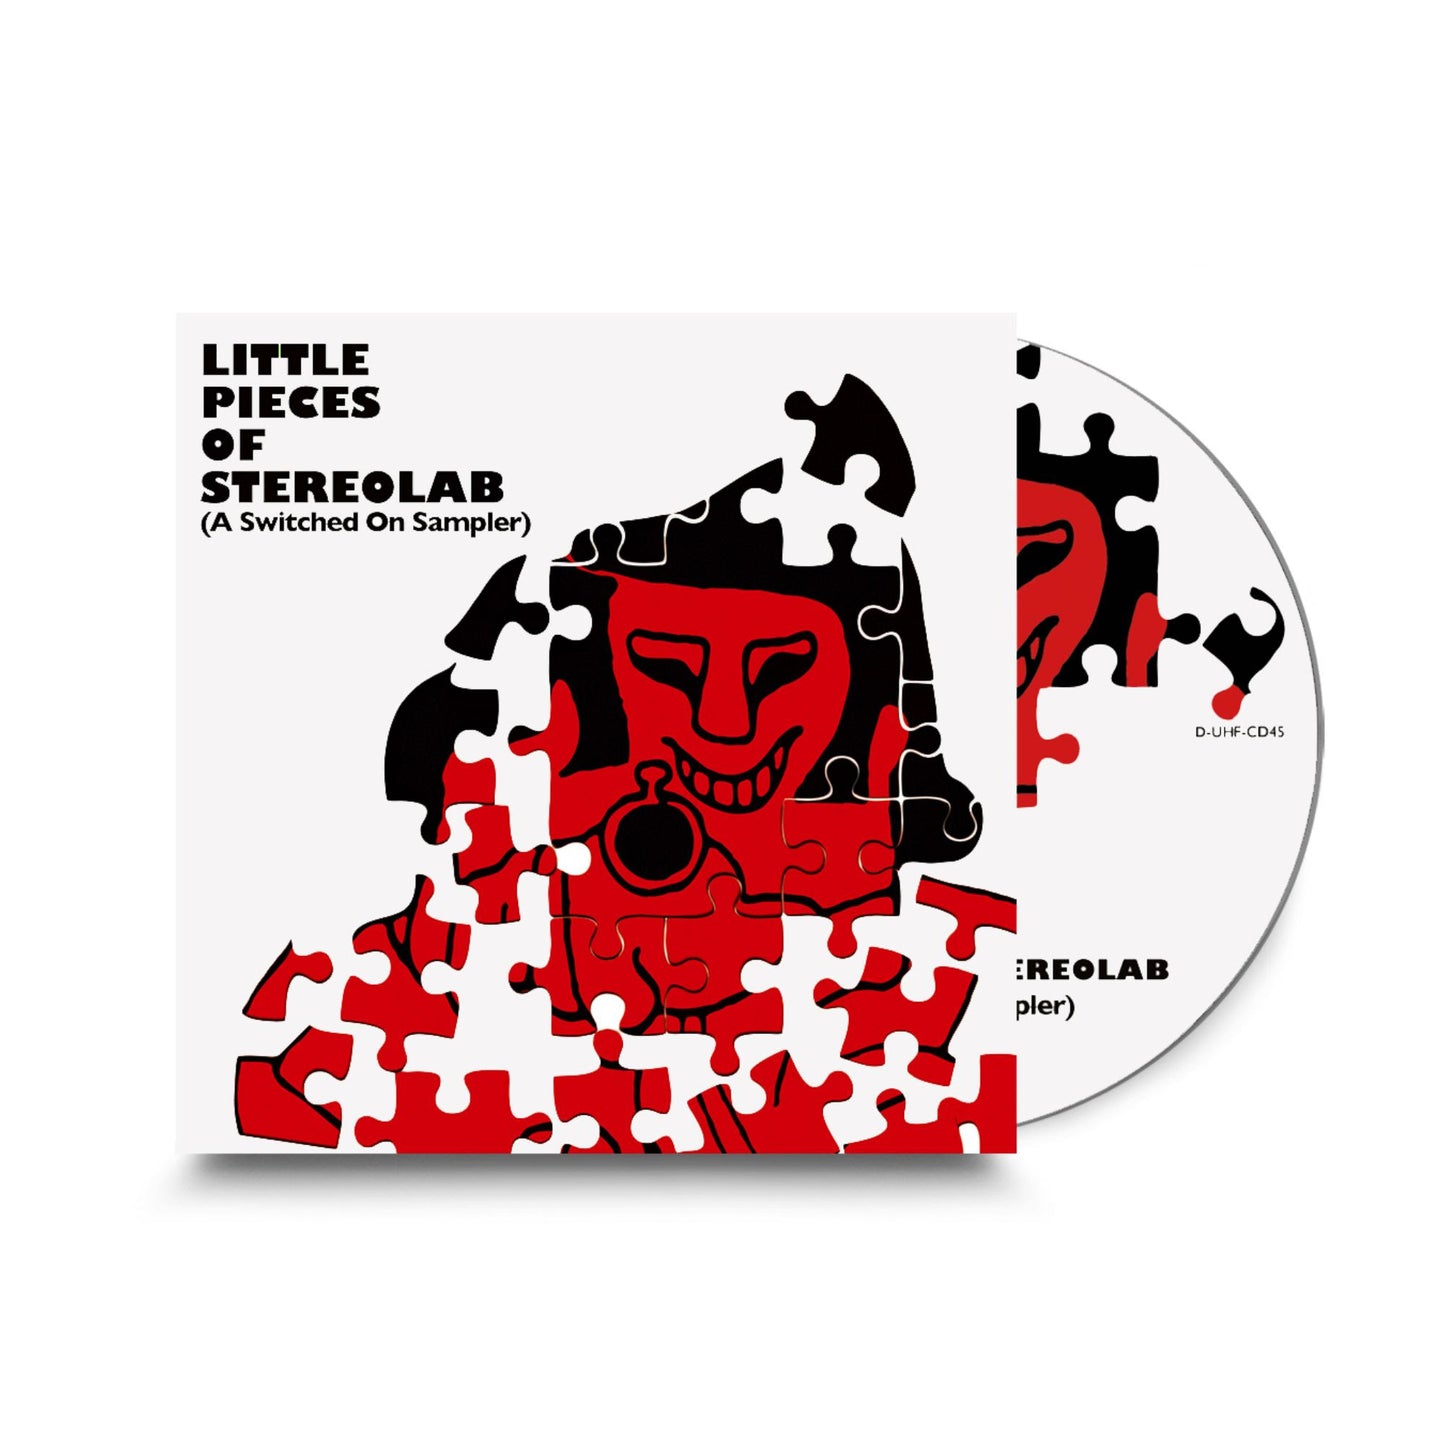 Stereolab - Little Pieces of Stereolab | Buy the CD from Flying Nun Records